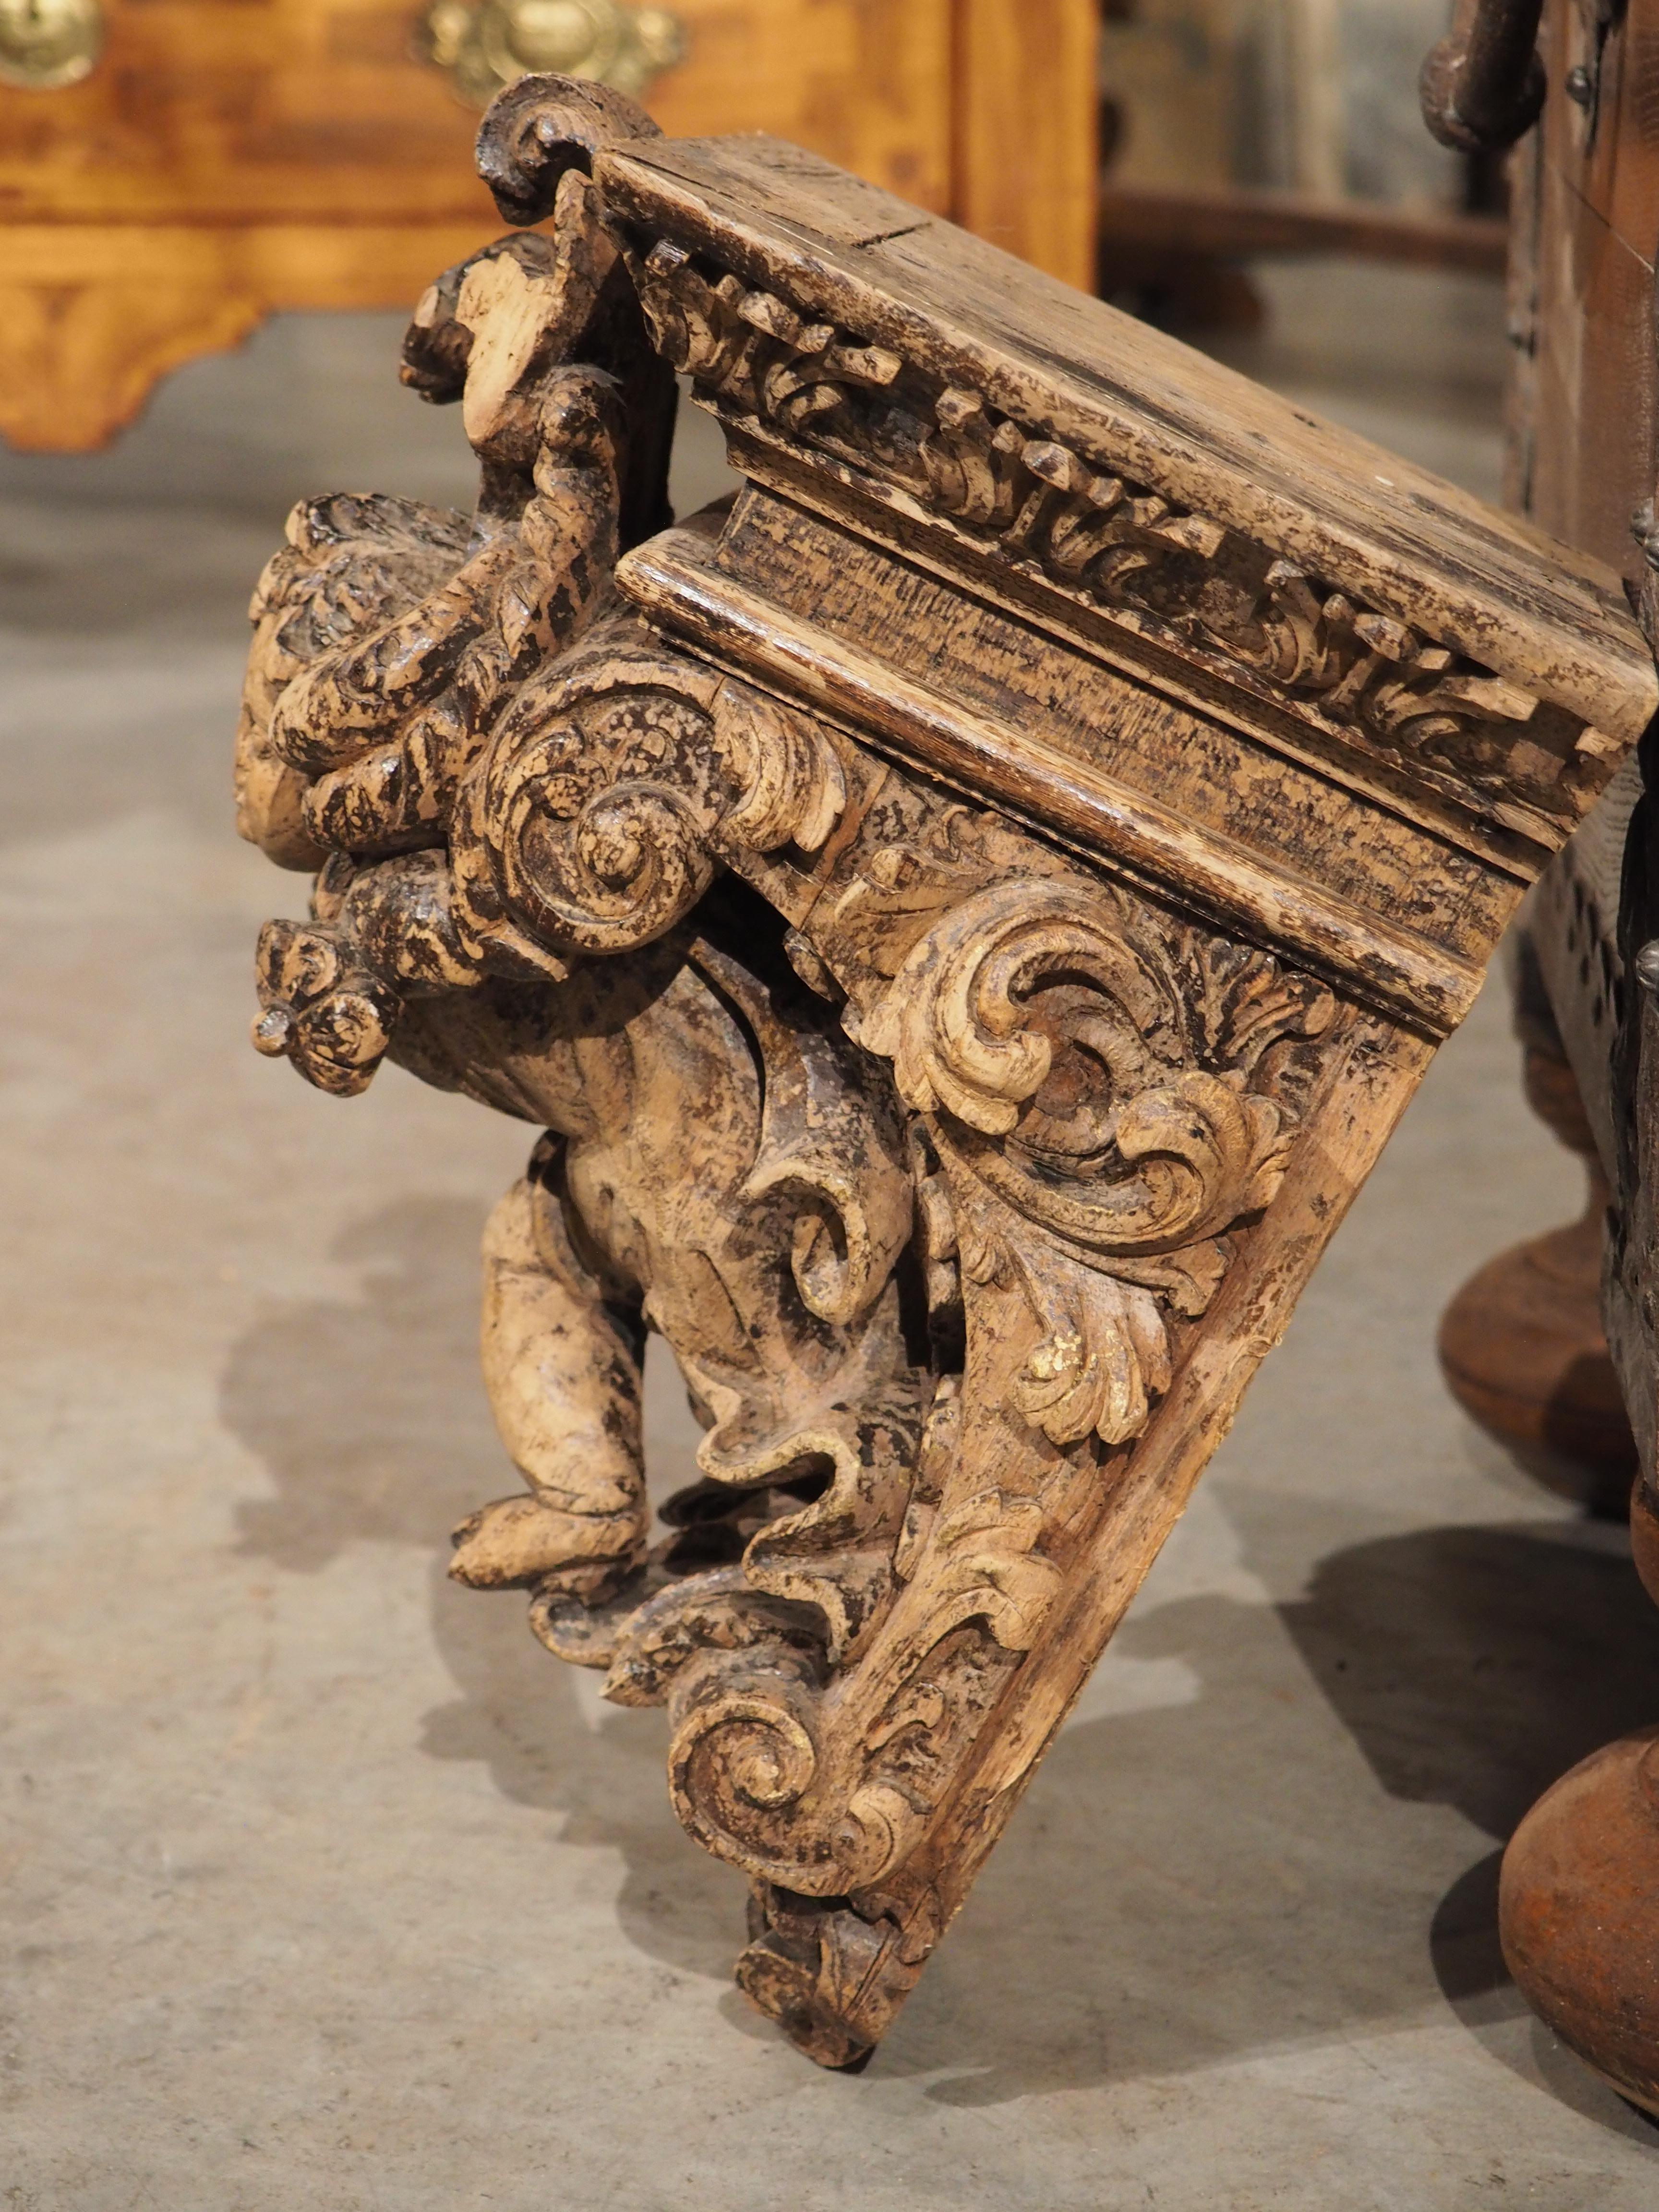 This pair of oak cherub brackets, or “consoles murale” originate from France and date to the mid-19th century. The intricate carvings adorning these marvels attest to the remarkable craftsmanship of their maker. Each corbel is fronted by an